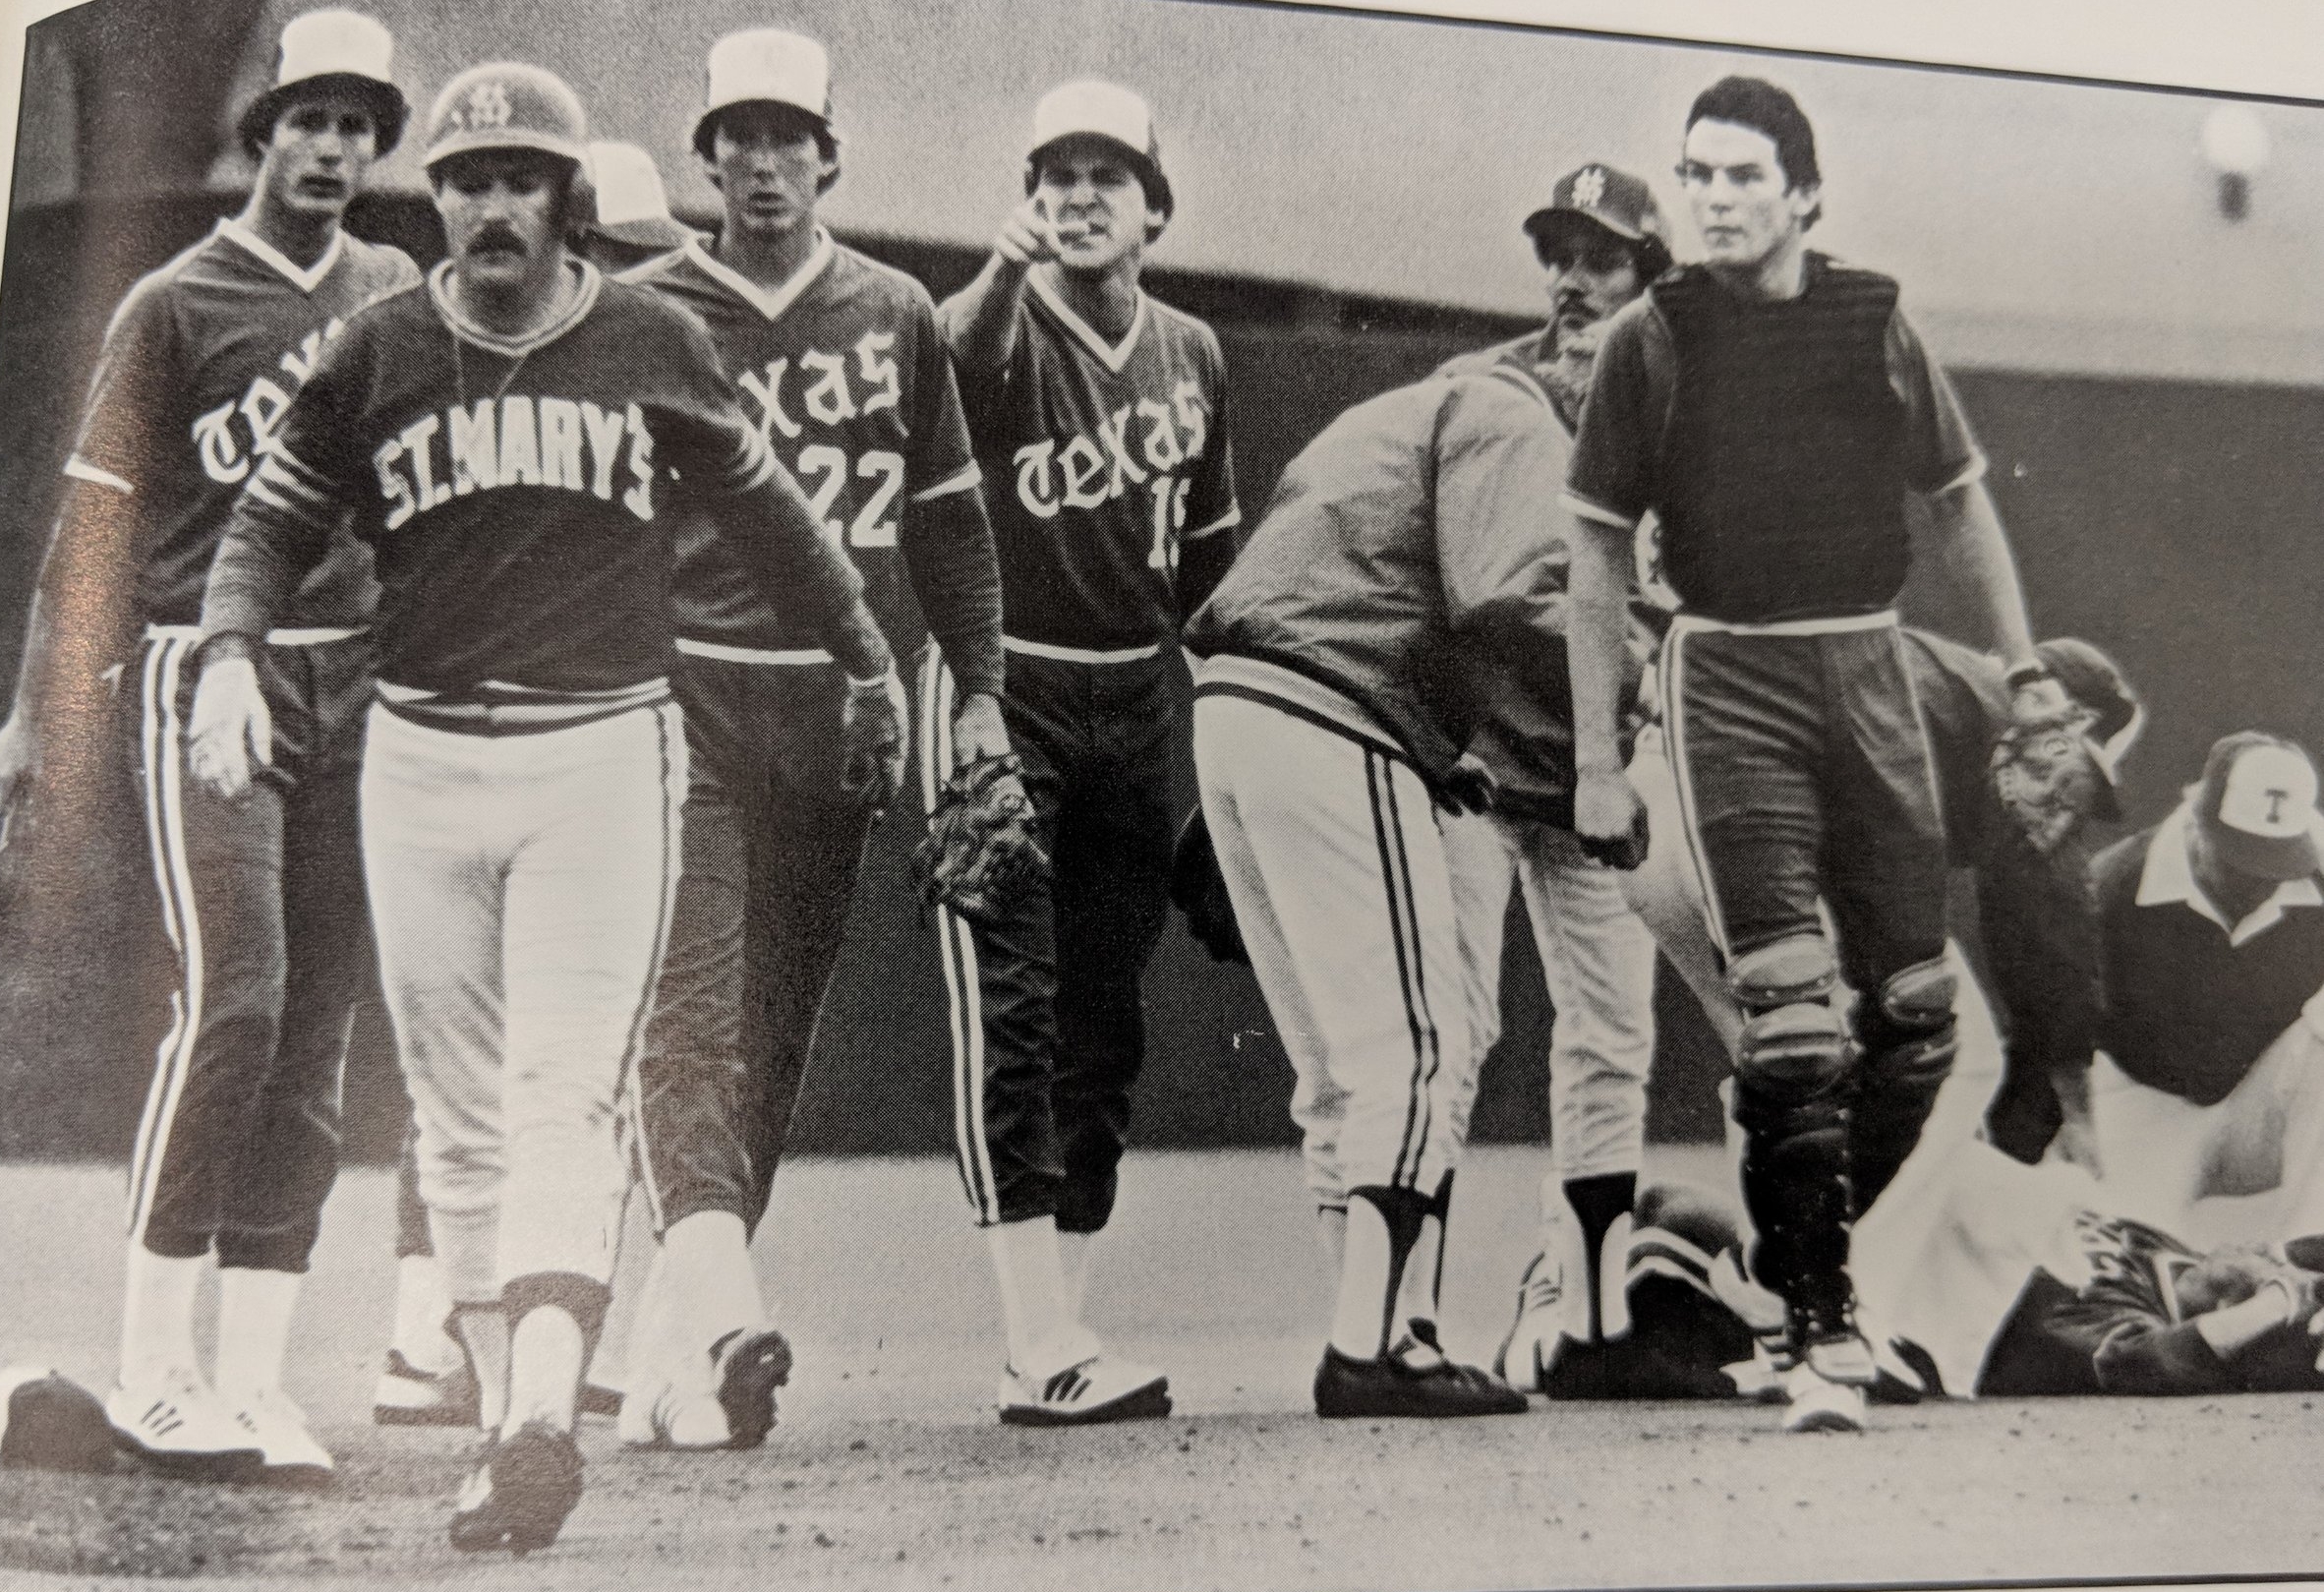 St. Mary's Steve Rambie walks away from second base as Texas players taunt him after a collision with Texas David Dean. David was lost for the season.